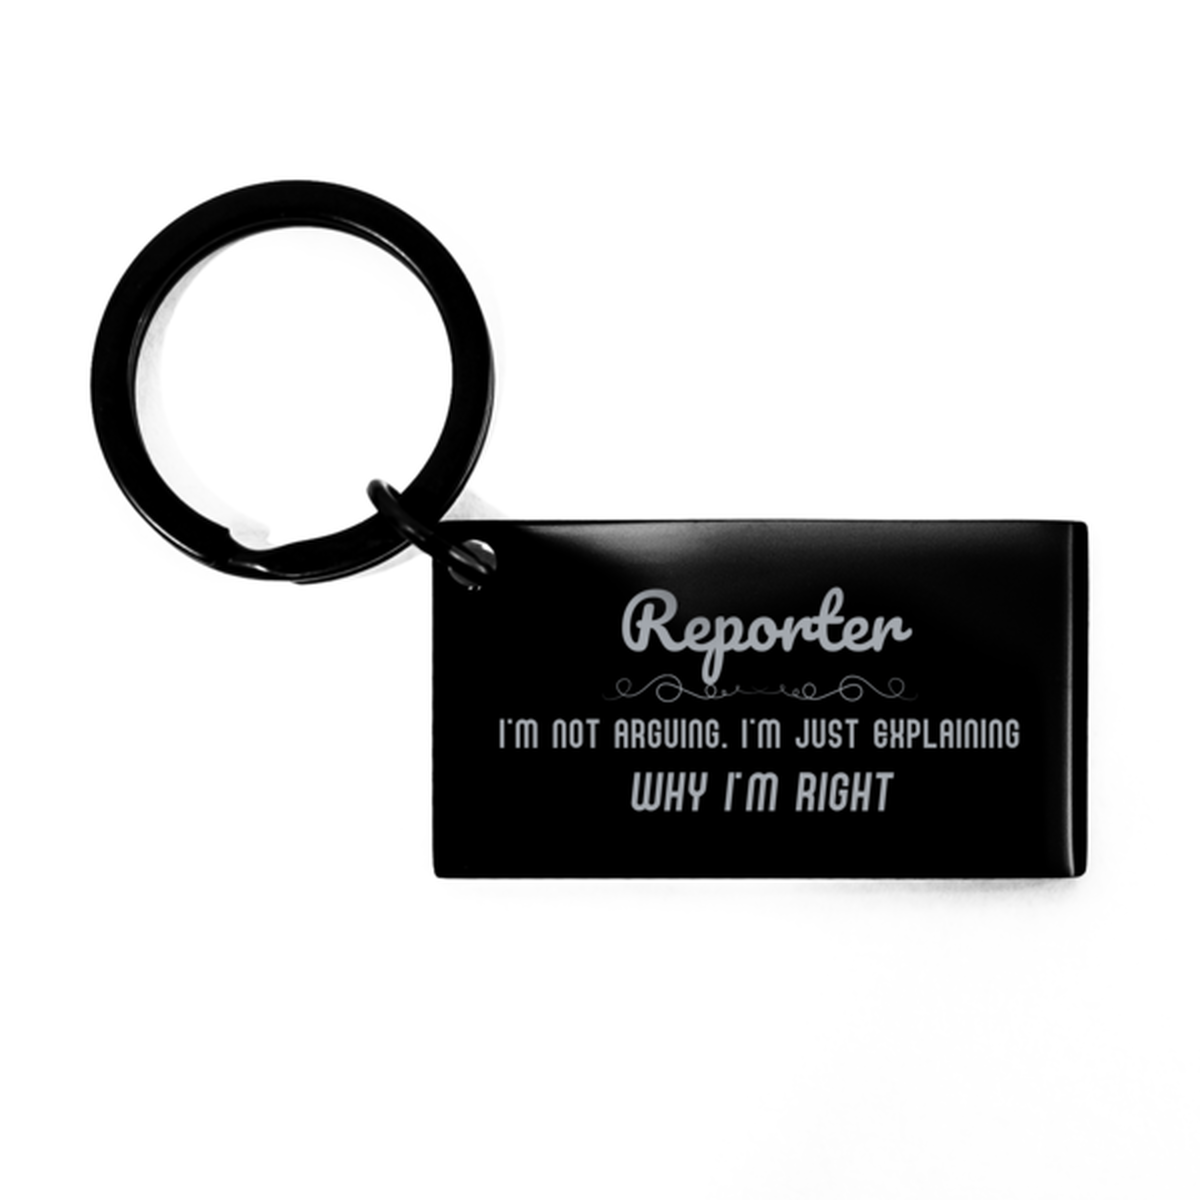 Reporter I'm not Arguing. I'm Just Explaining Why I'm RIGHT Keychain, Funny Saying Quote Reporter Gifts For Reporter Graduation Birthday Christmas Gifts for Men Women Coworker